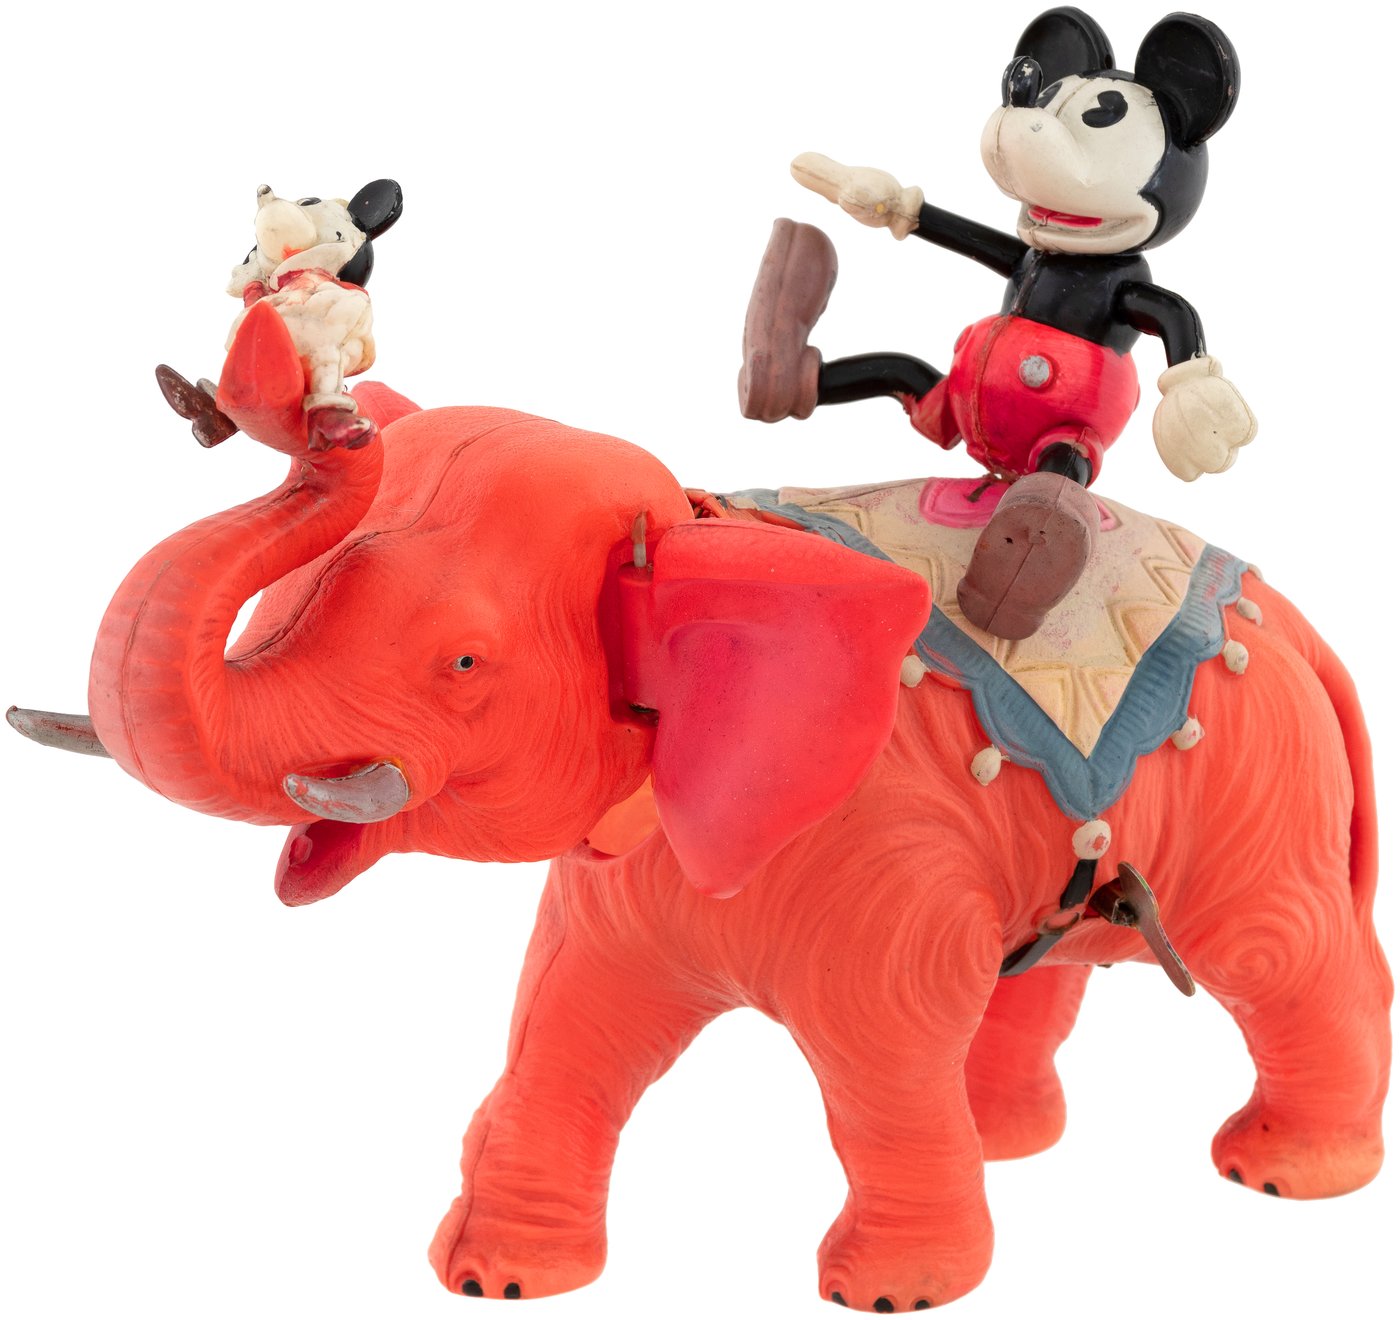 Hake S Mickey And Minnie Riding Elephant Large Celluloid Wind Up